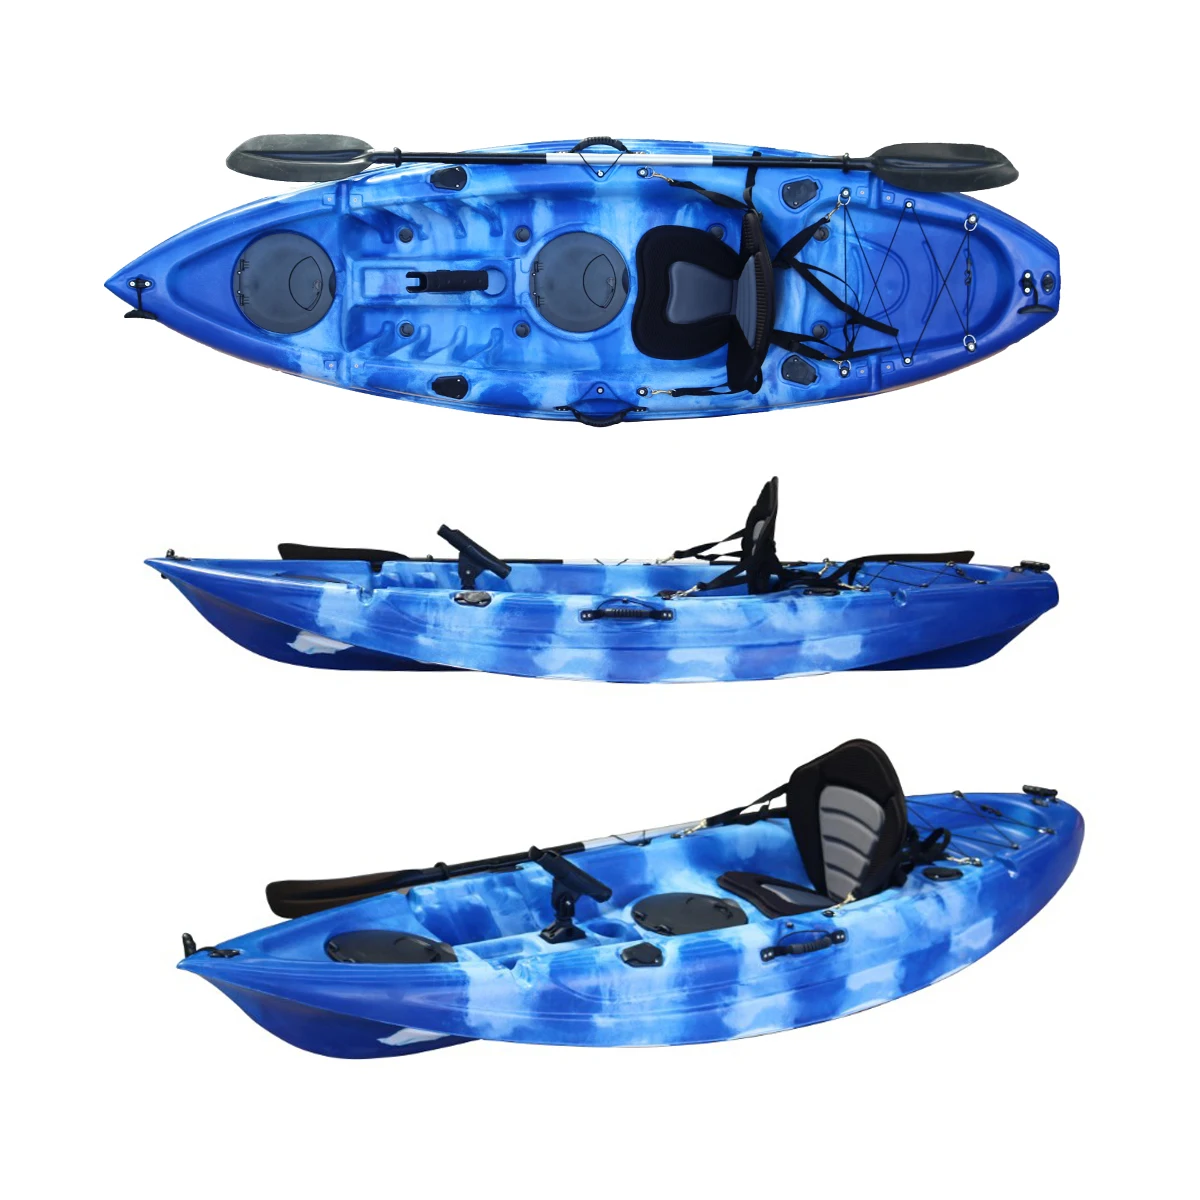 

Vicking 9ft single person fishing kayak sit on top fishing kayaks wholesale with paddle, Camo, red,yellow,blue,green,black,white,yellow mixed green......